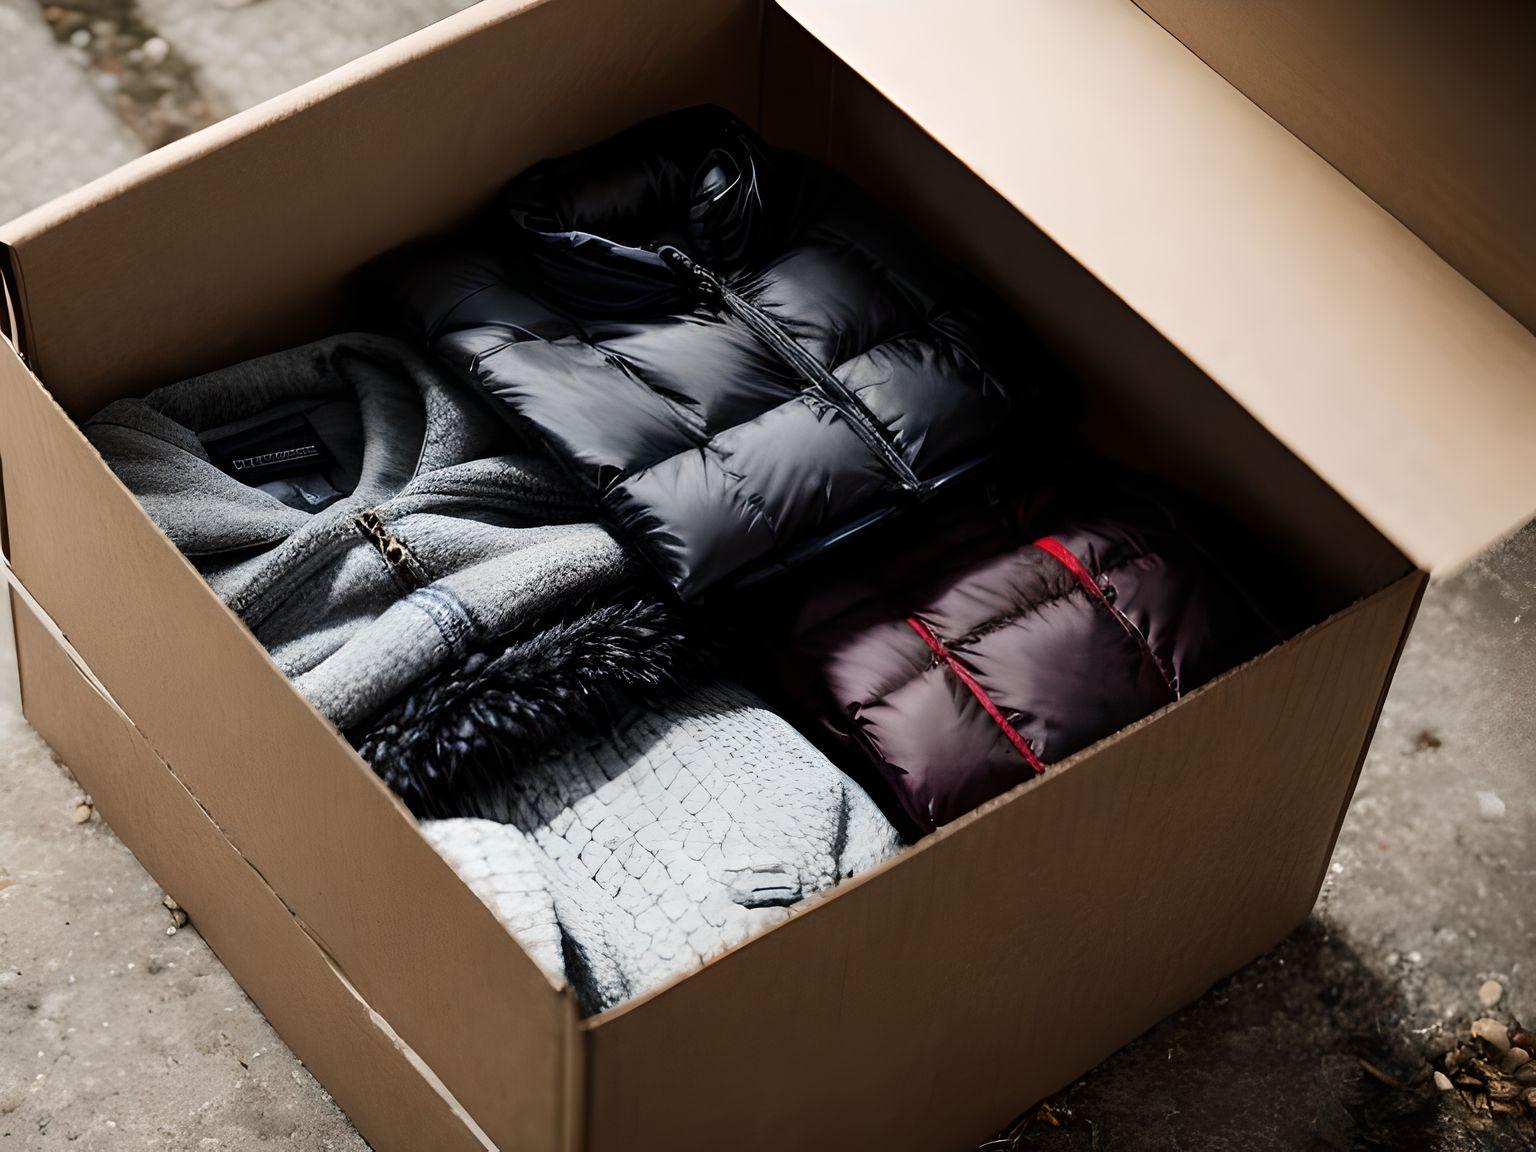 Jackets in a box